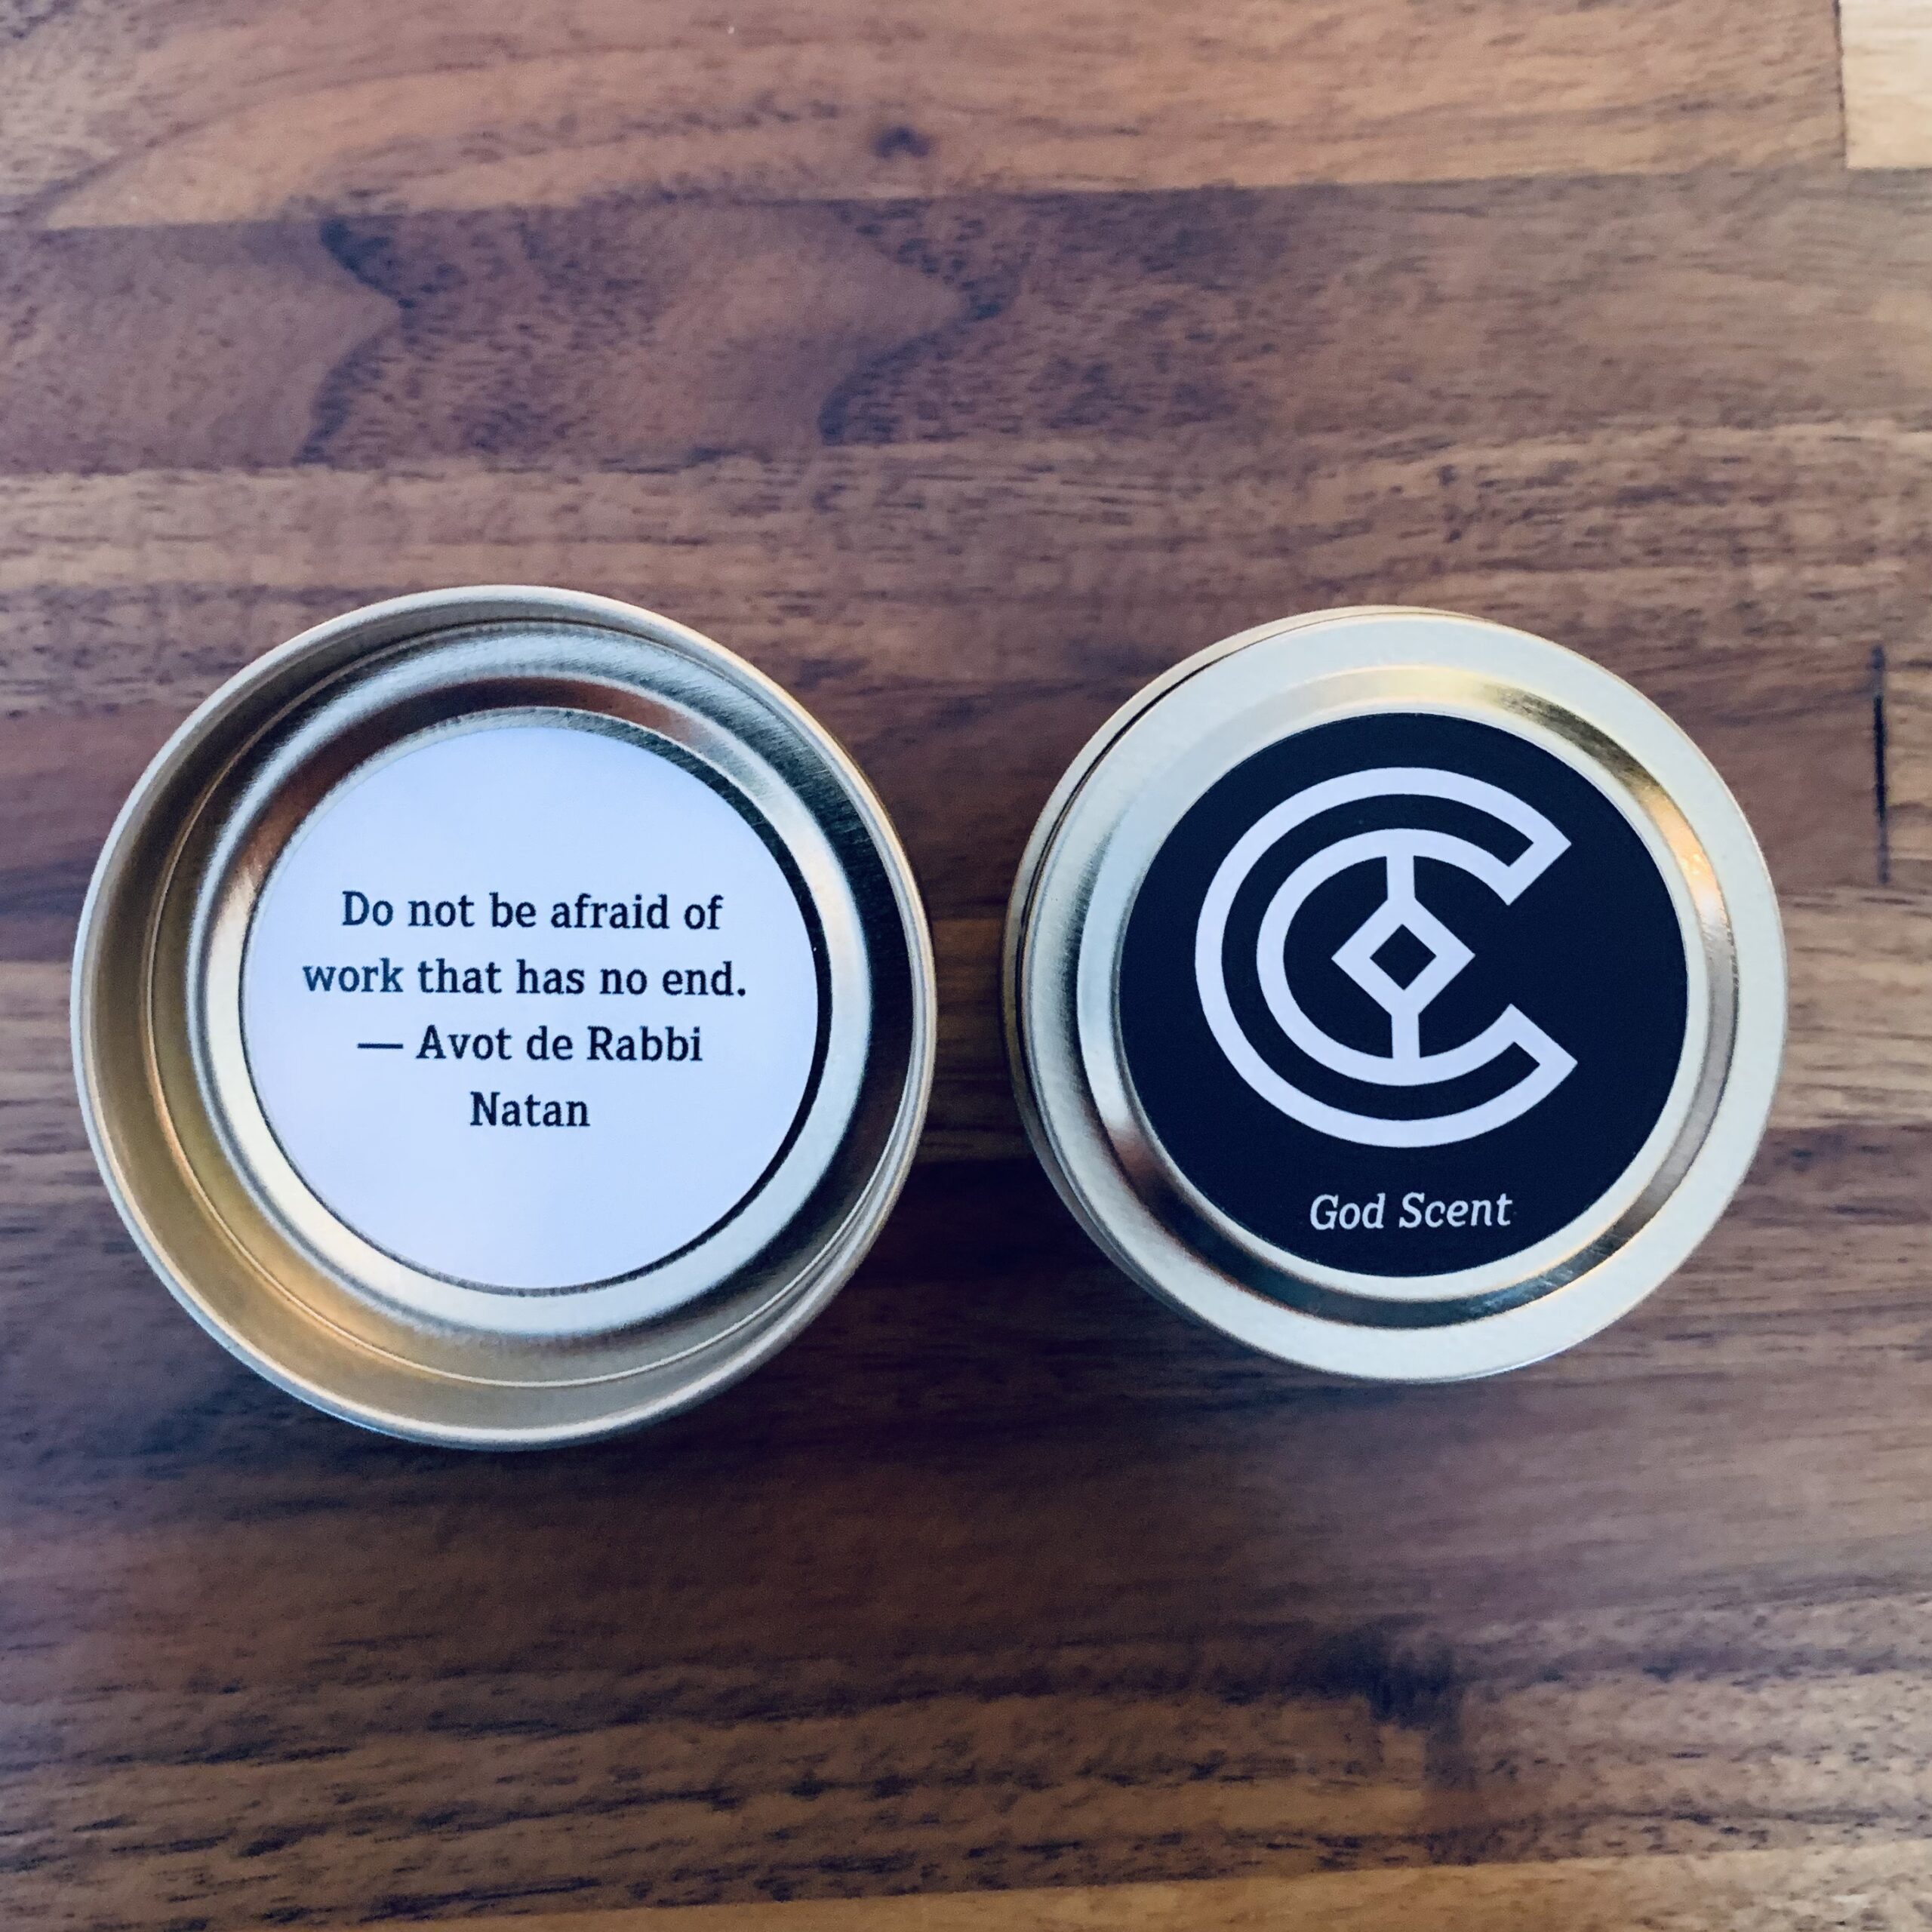 what is a god candle crypto